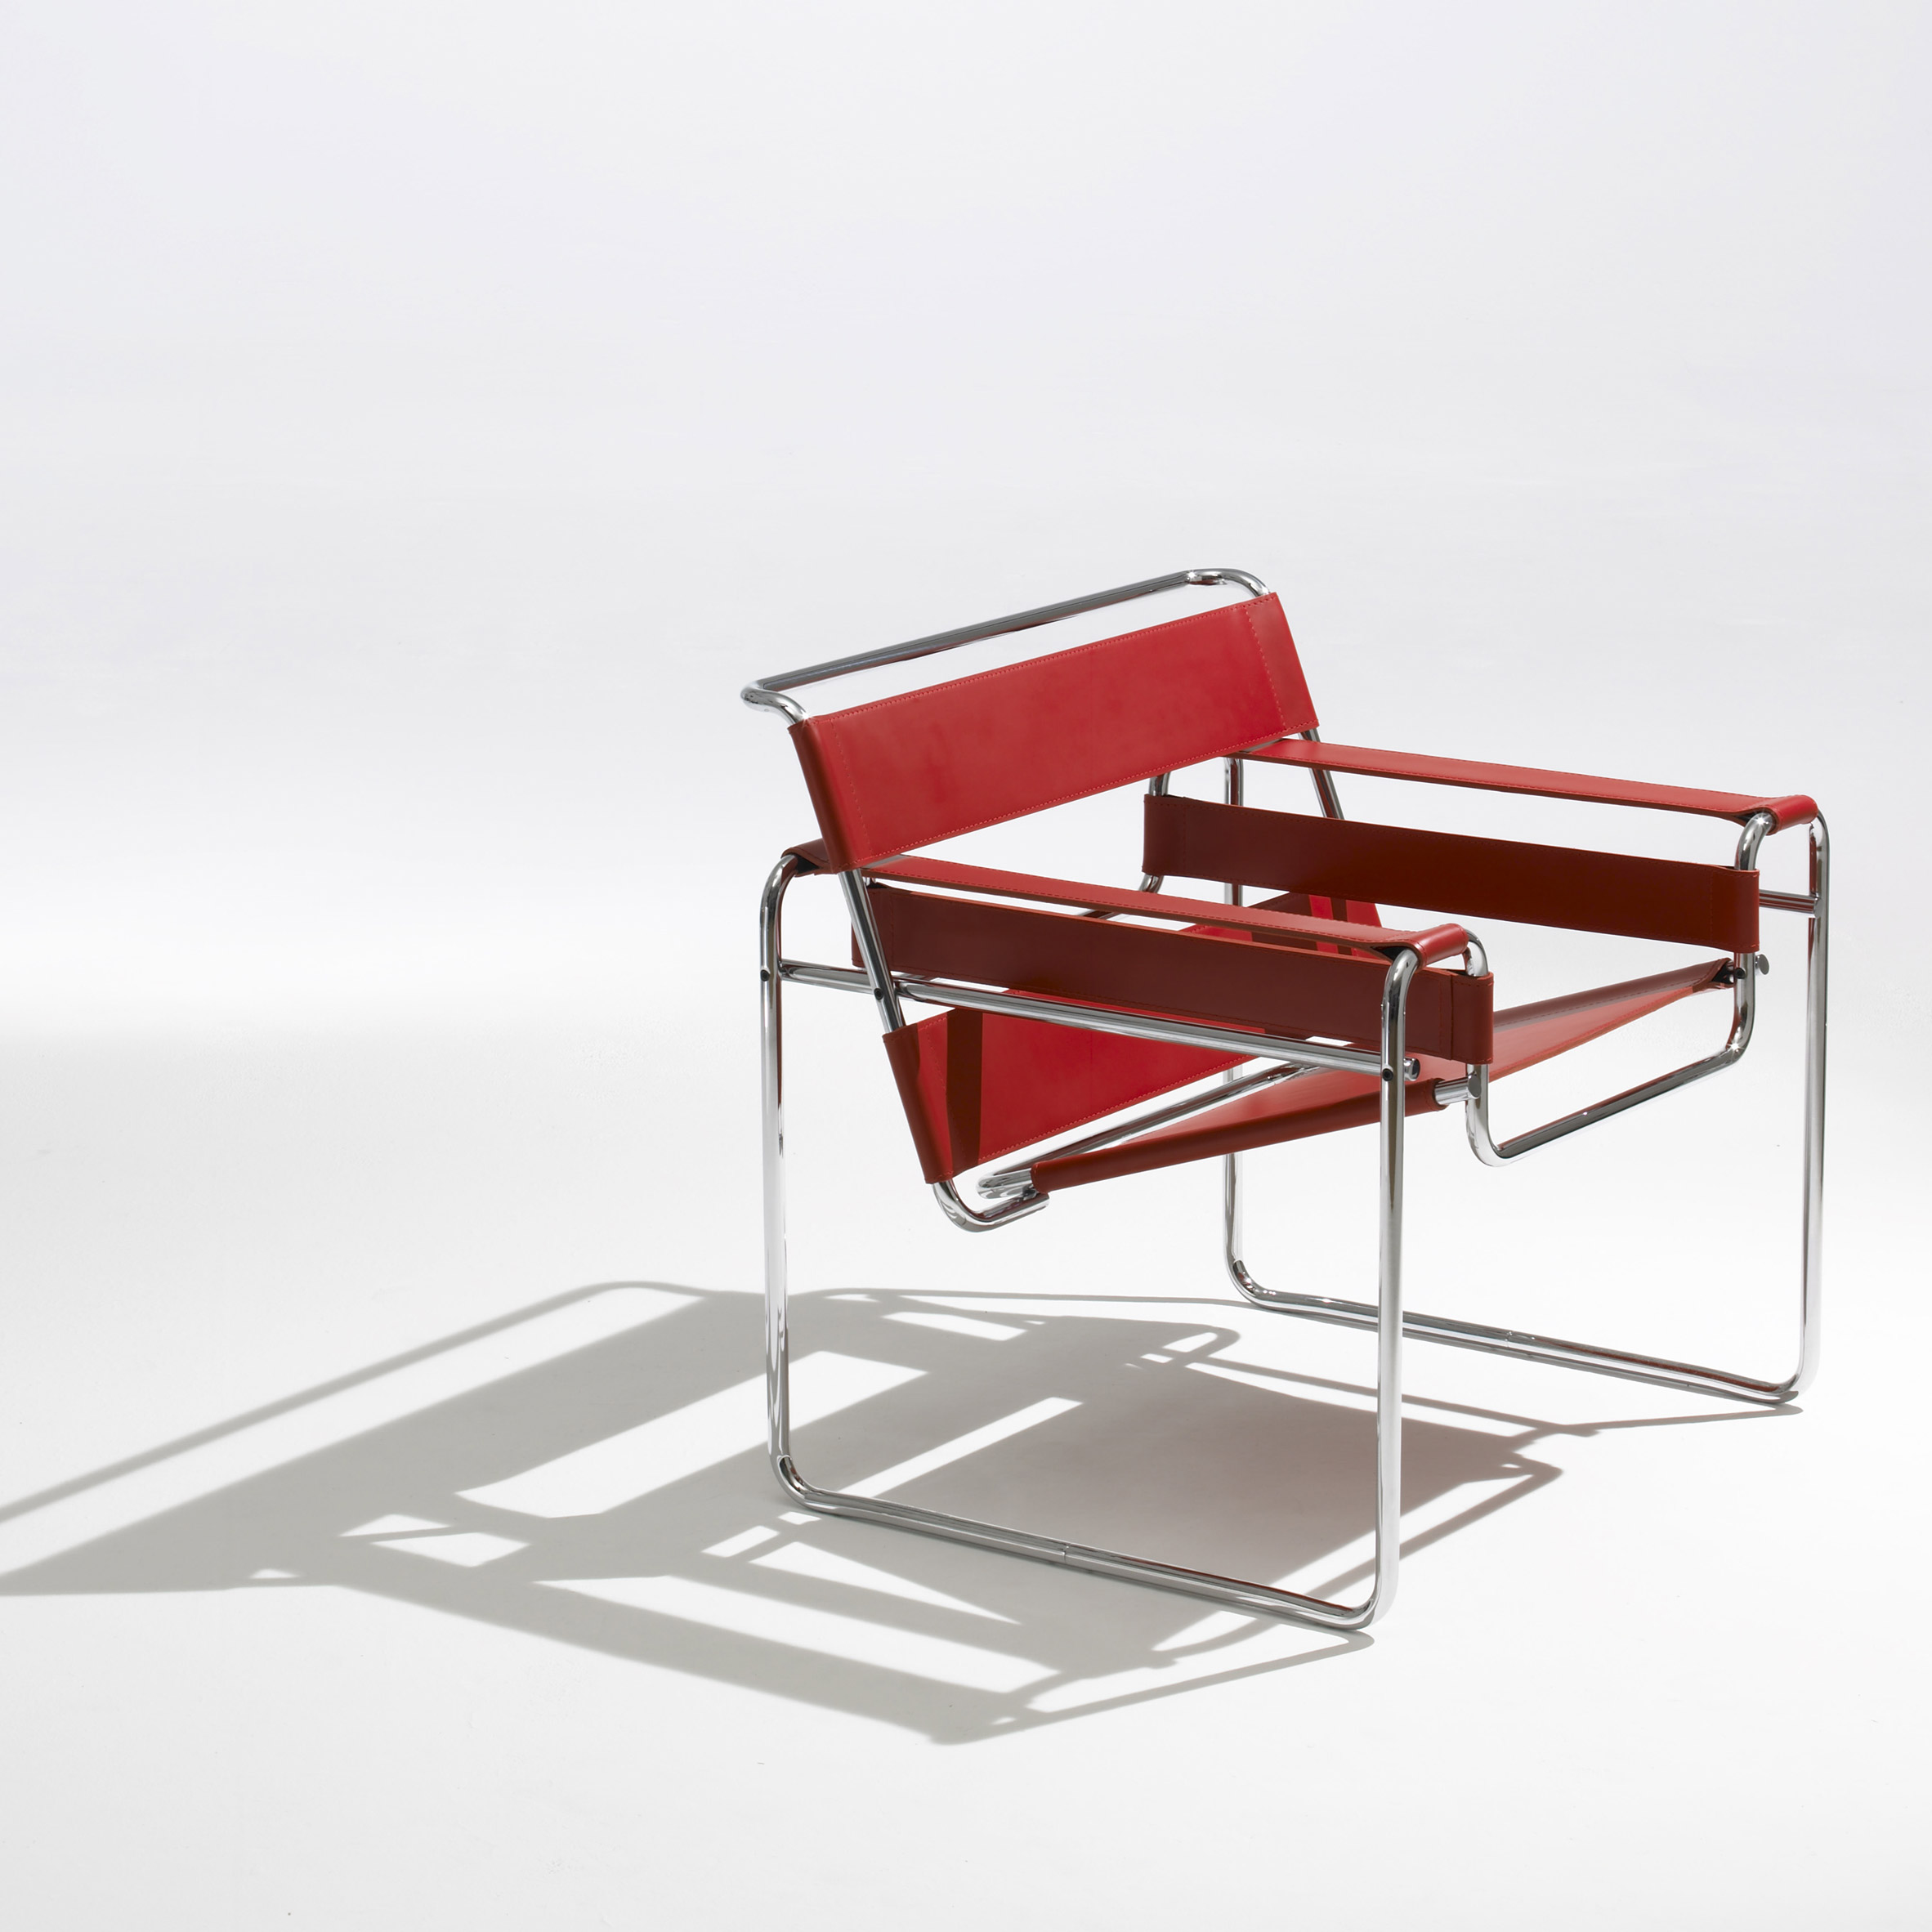 10 iconic Bauhaus furniture designs: chairs, tables, a lamp and a 